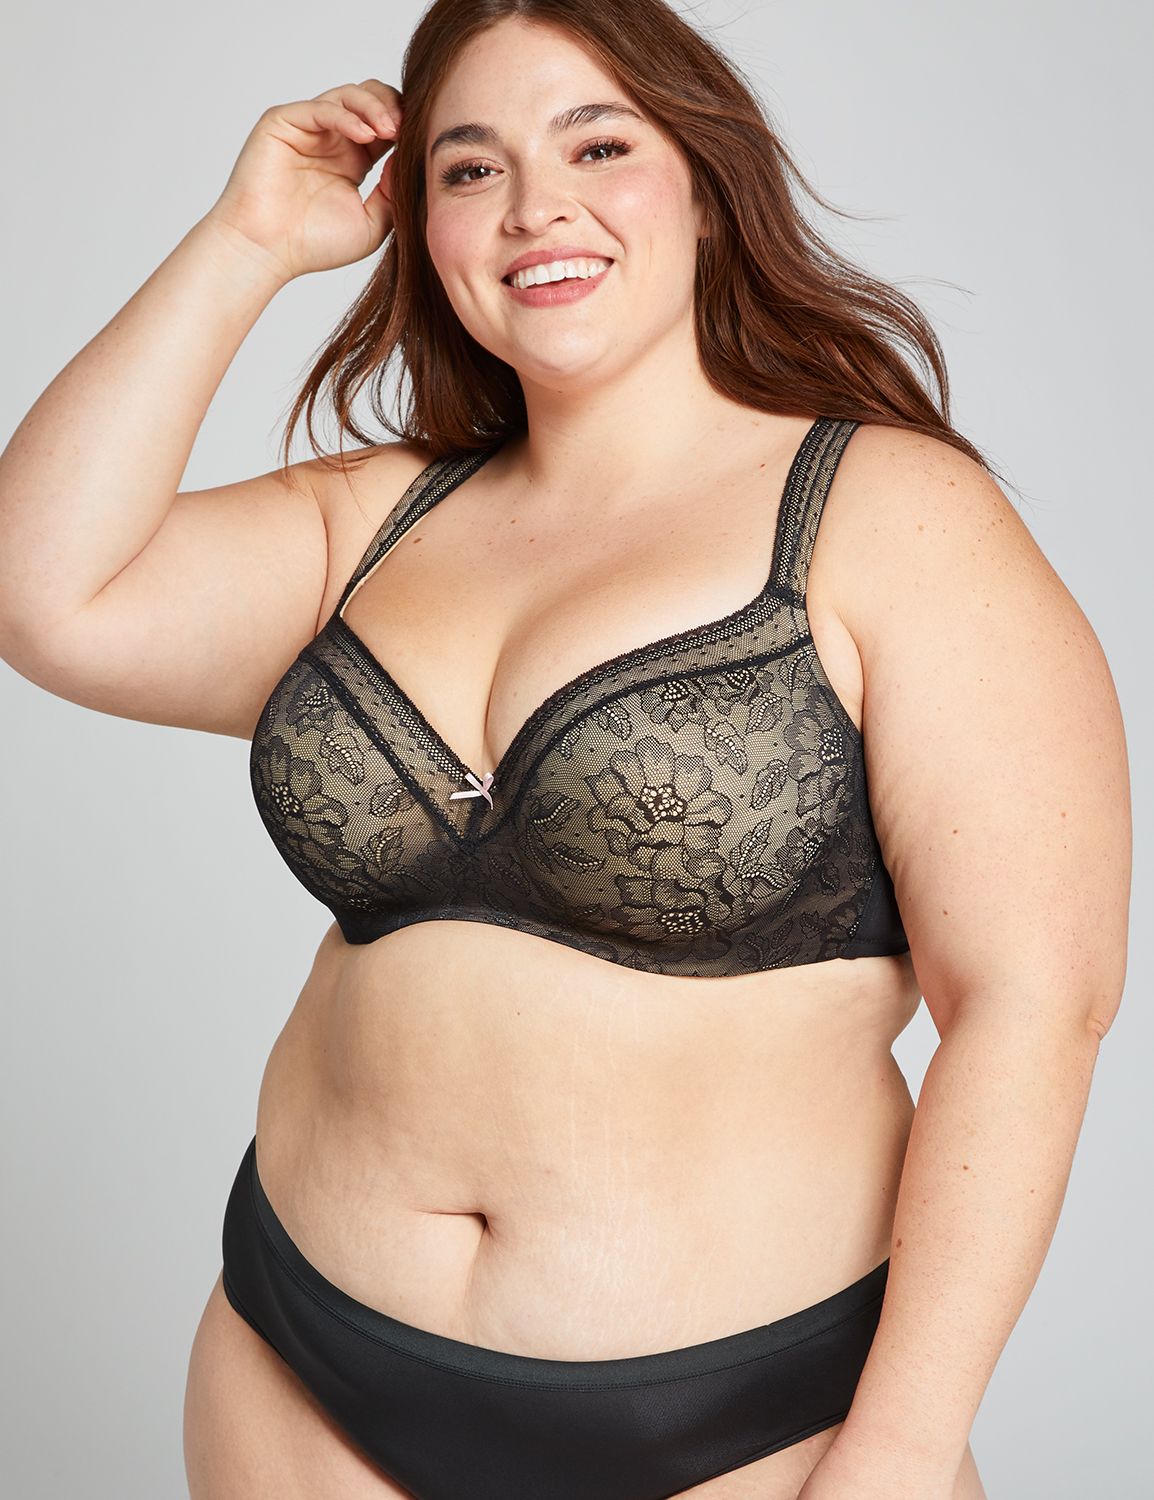 Details about   Sexy Balconette Modern Lace Lightly Lined Bra TEAL Cacique Lane Bryant  New